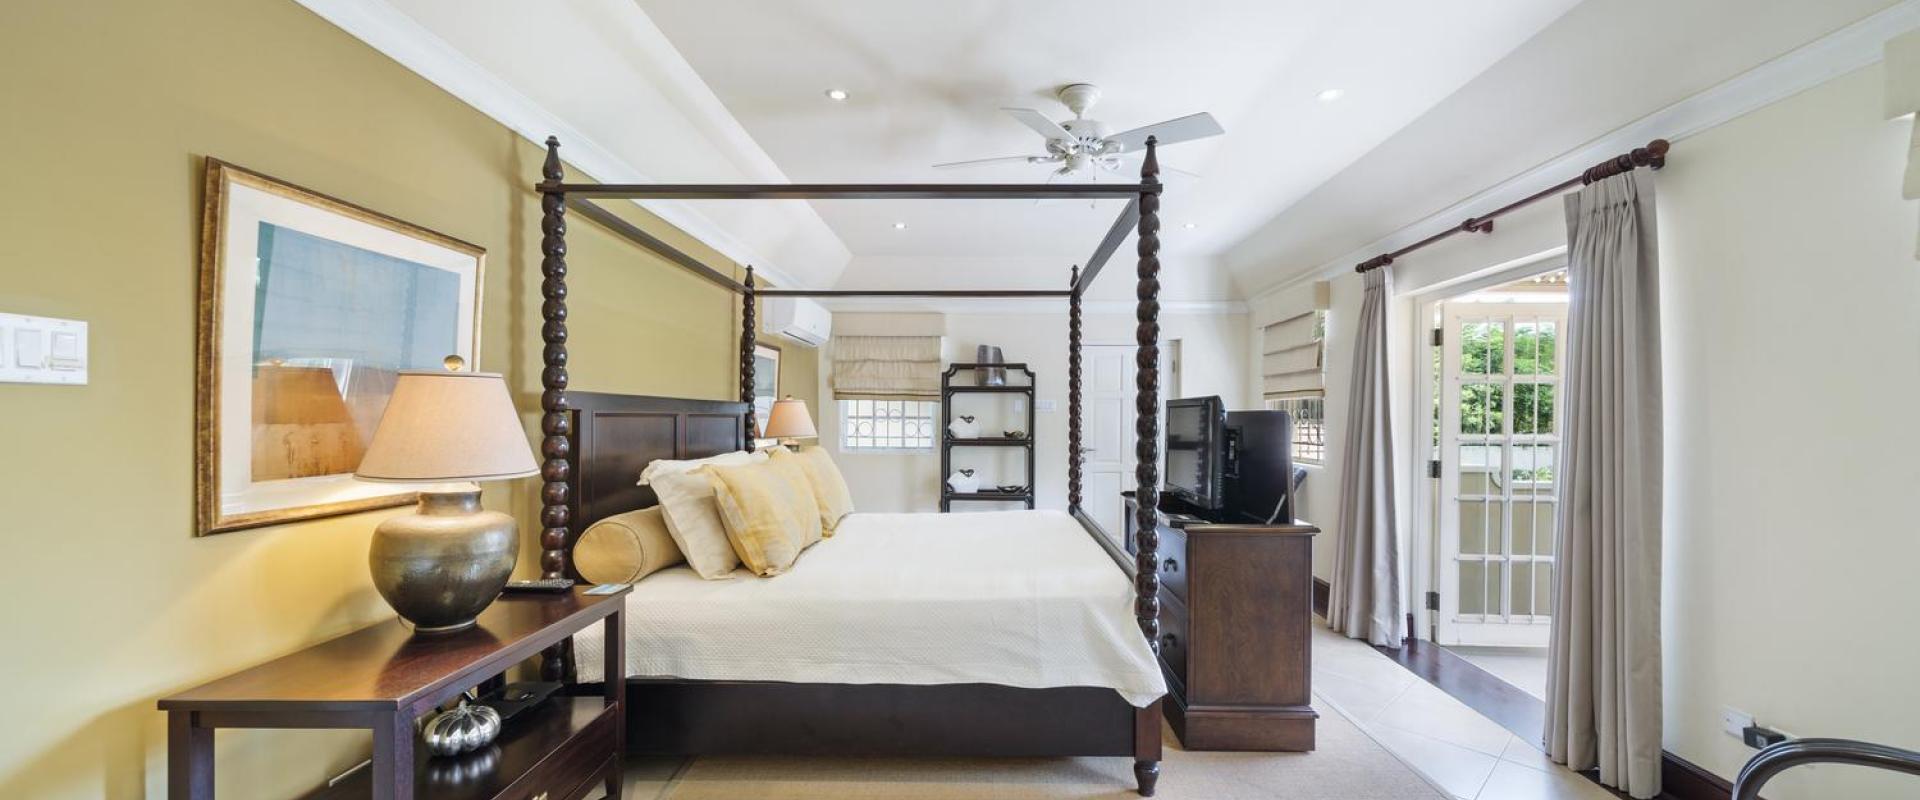 Tara Barbados 4 Bedroom Holiday Rental Villa Primary Bedroom with King Four Poster Bed